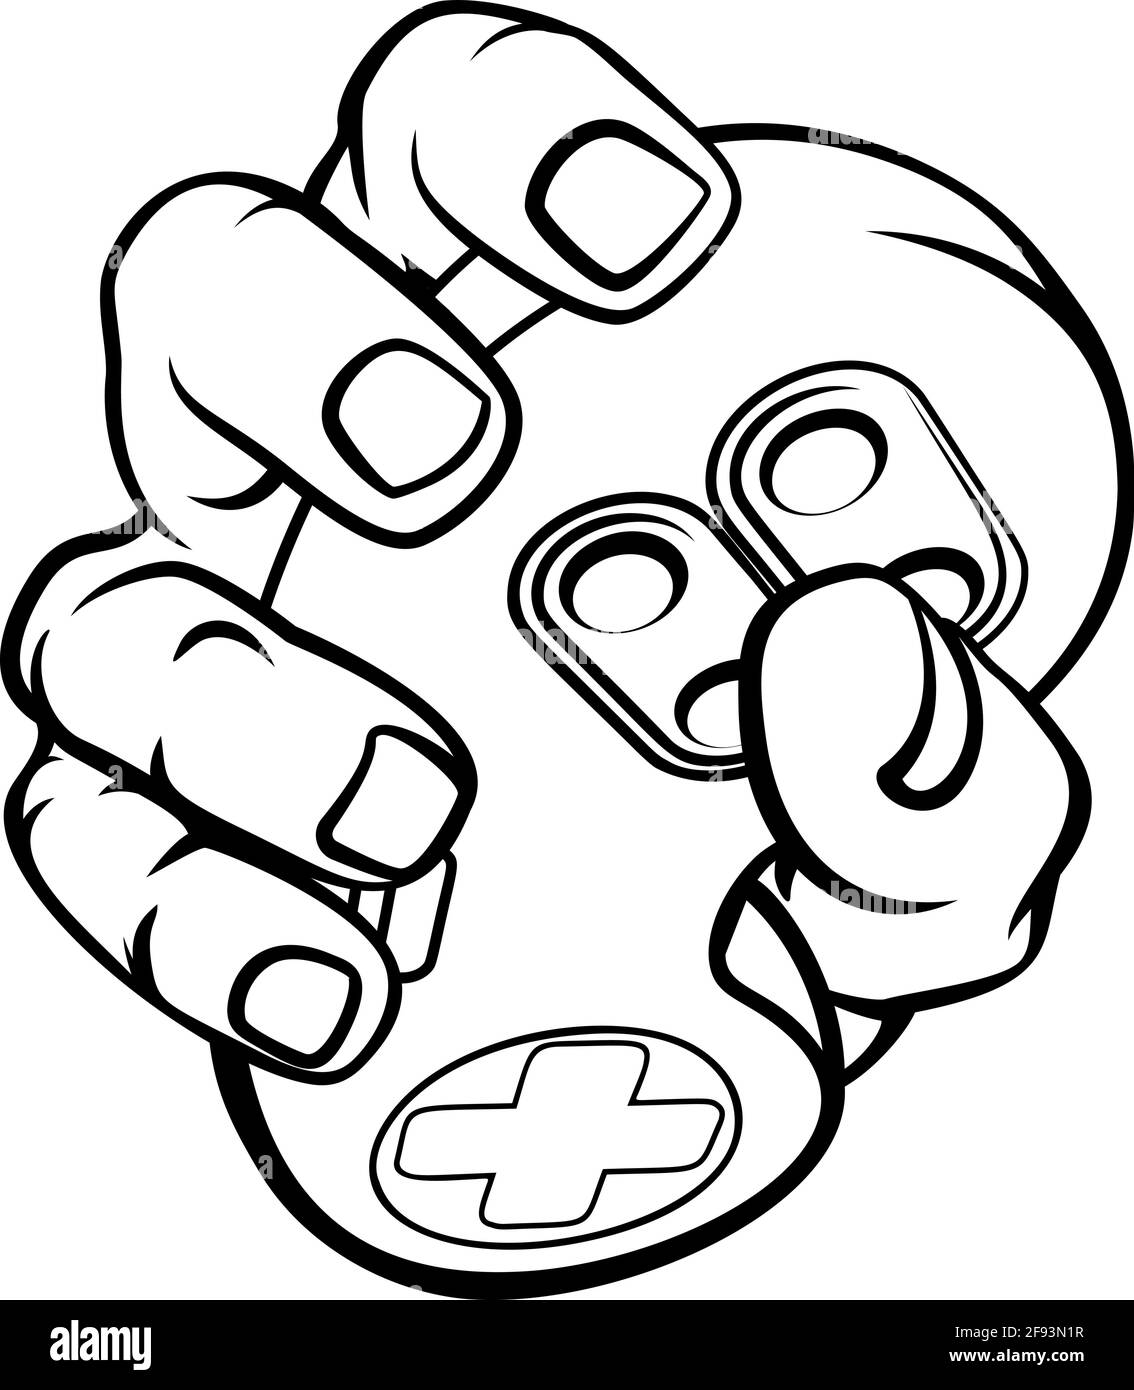 Gamer Hand Holding Video Gaming Game Controller Stock Vector